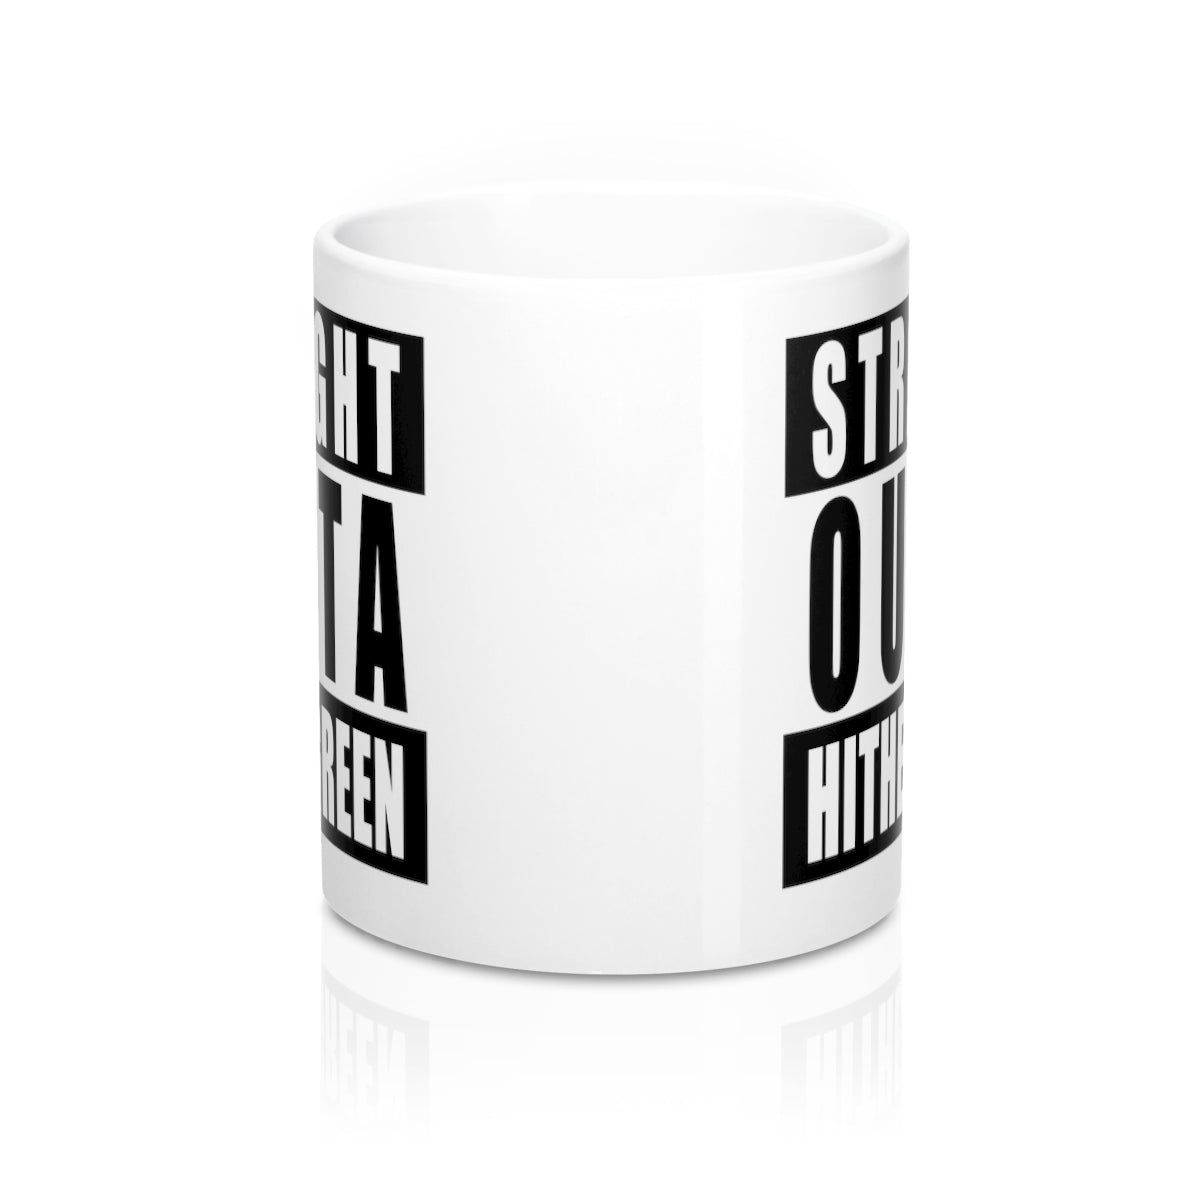 Straight Outta Hither Green Mug